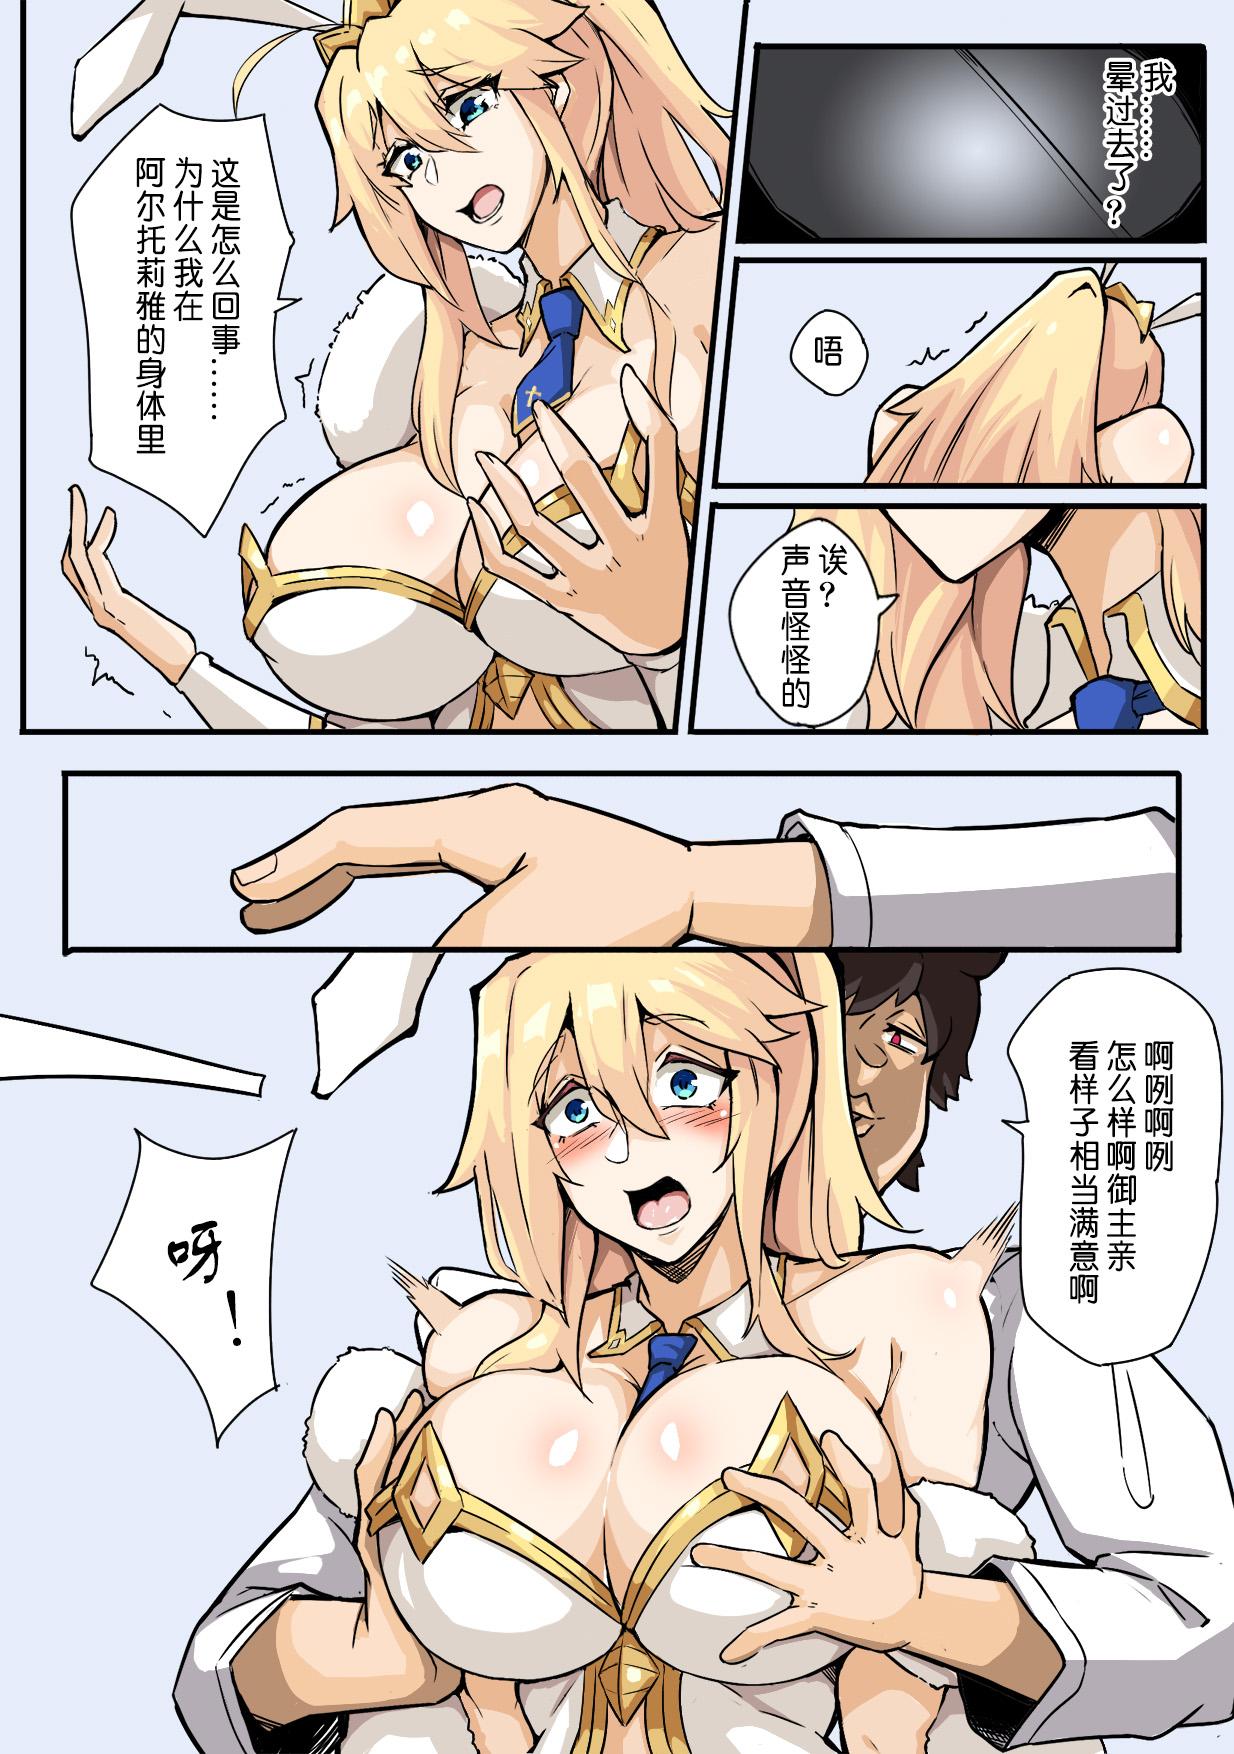 Ass Licking fate 黑胡子的阴谋 - Fate grand order Teen Sex - Page 7